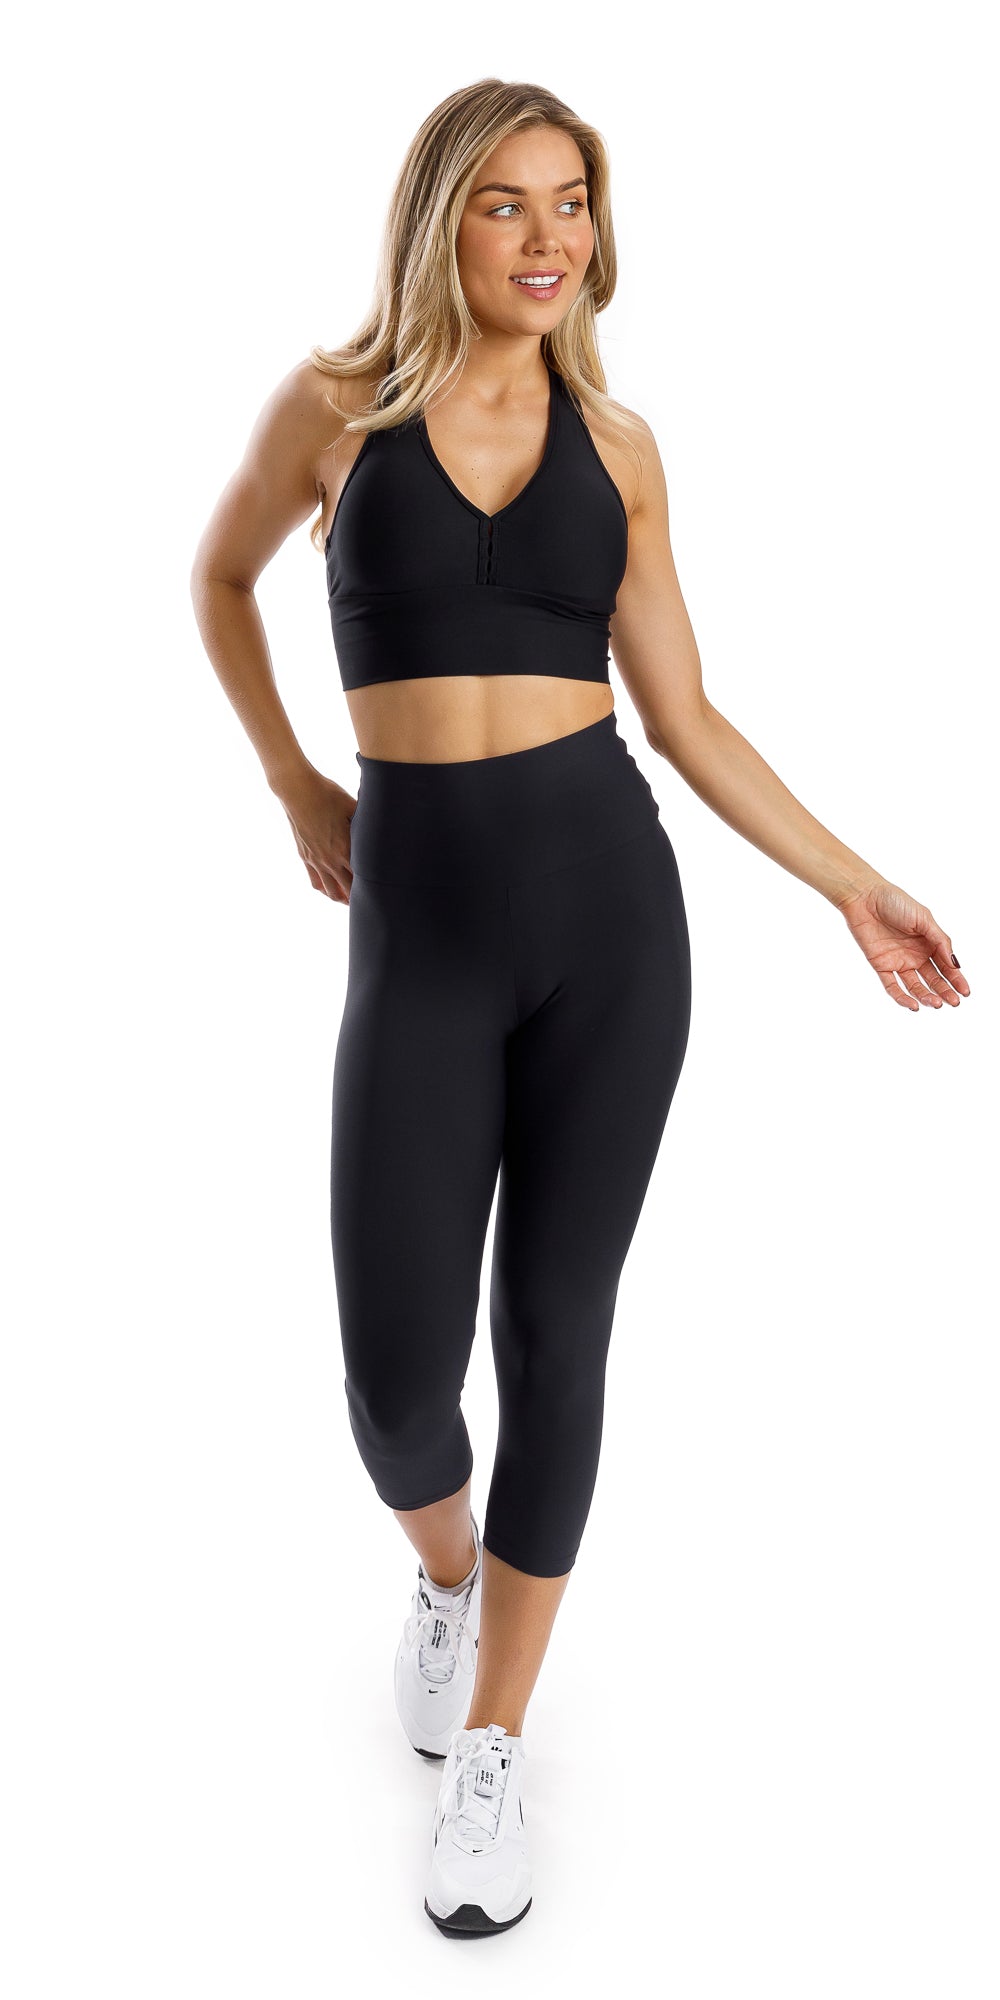 Full body front view of girl in black Midnight Eco Capri Leggings and matching bra walking and swaying arms